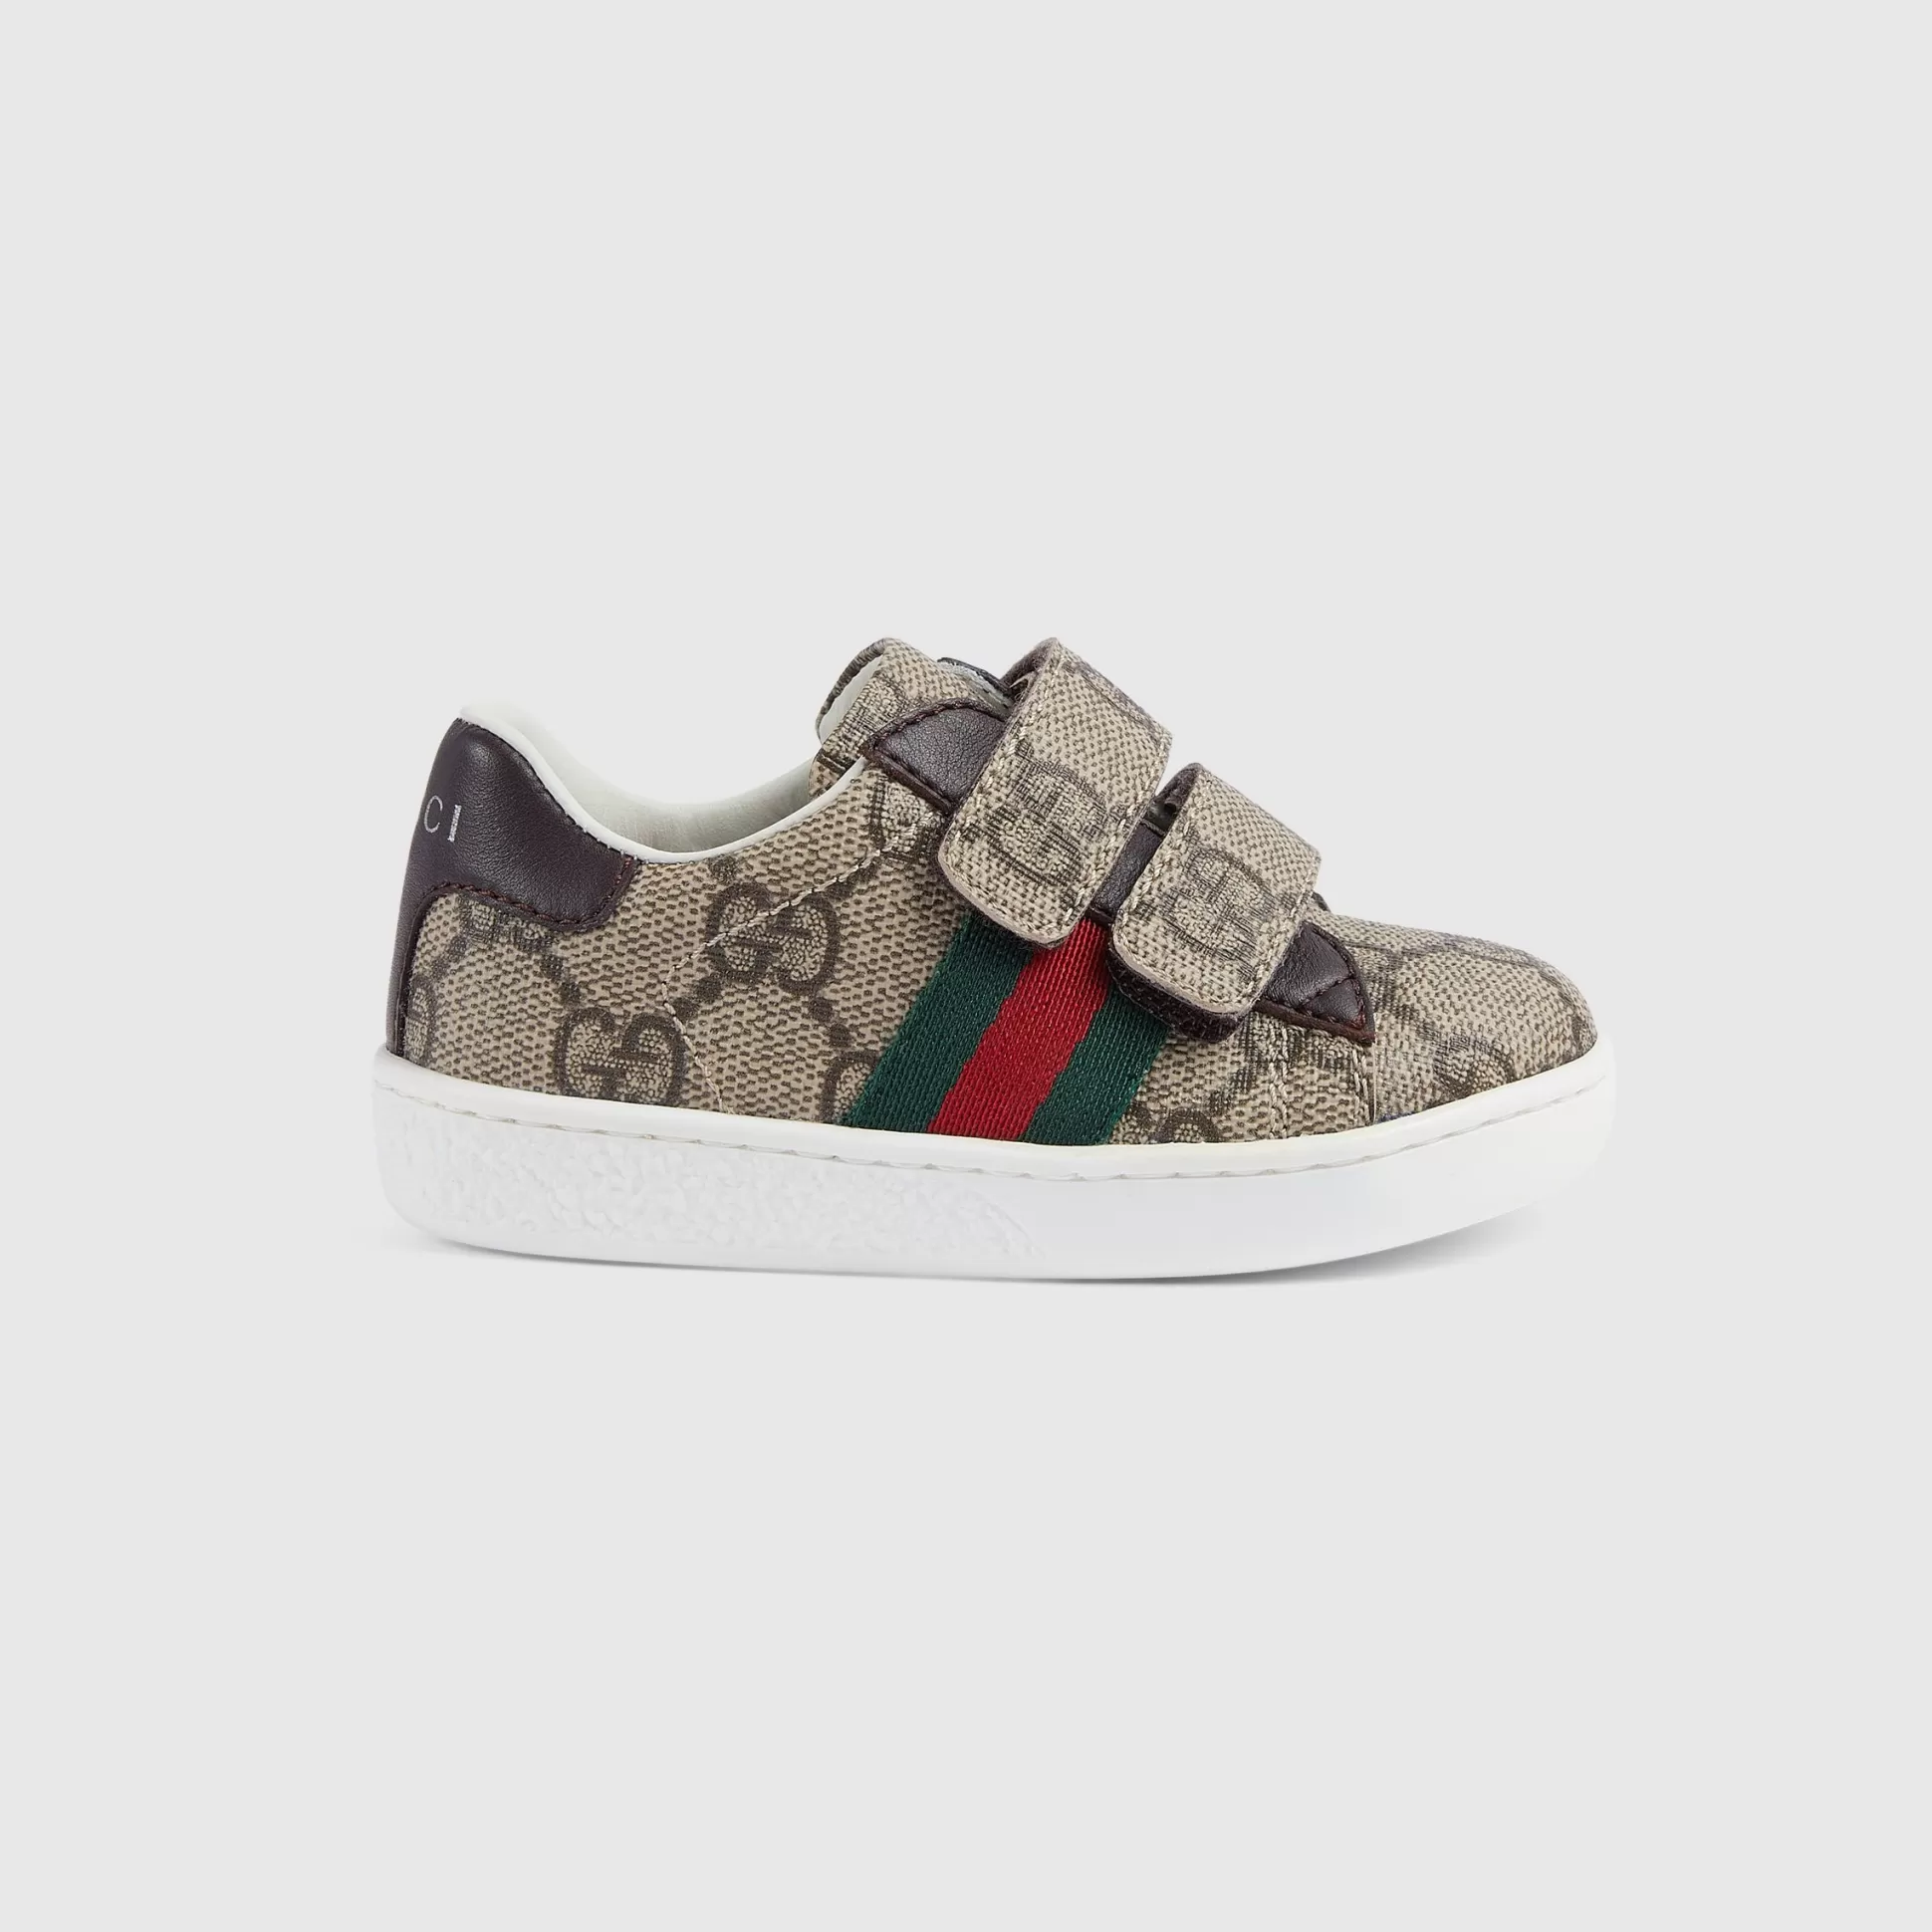 GUCCI Toddler Ace Sneaker-Children Toddler Shoes (20-26)